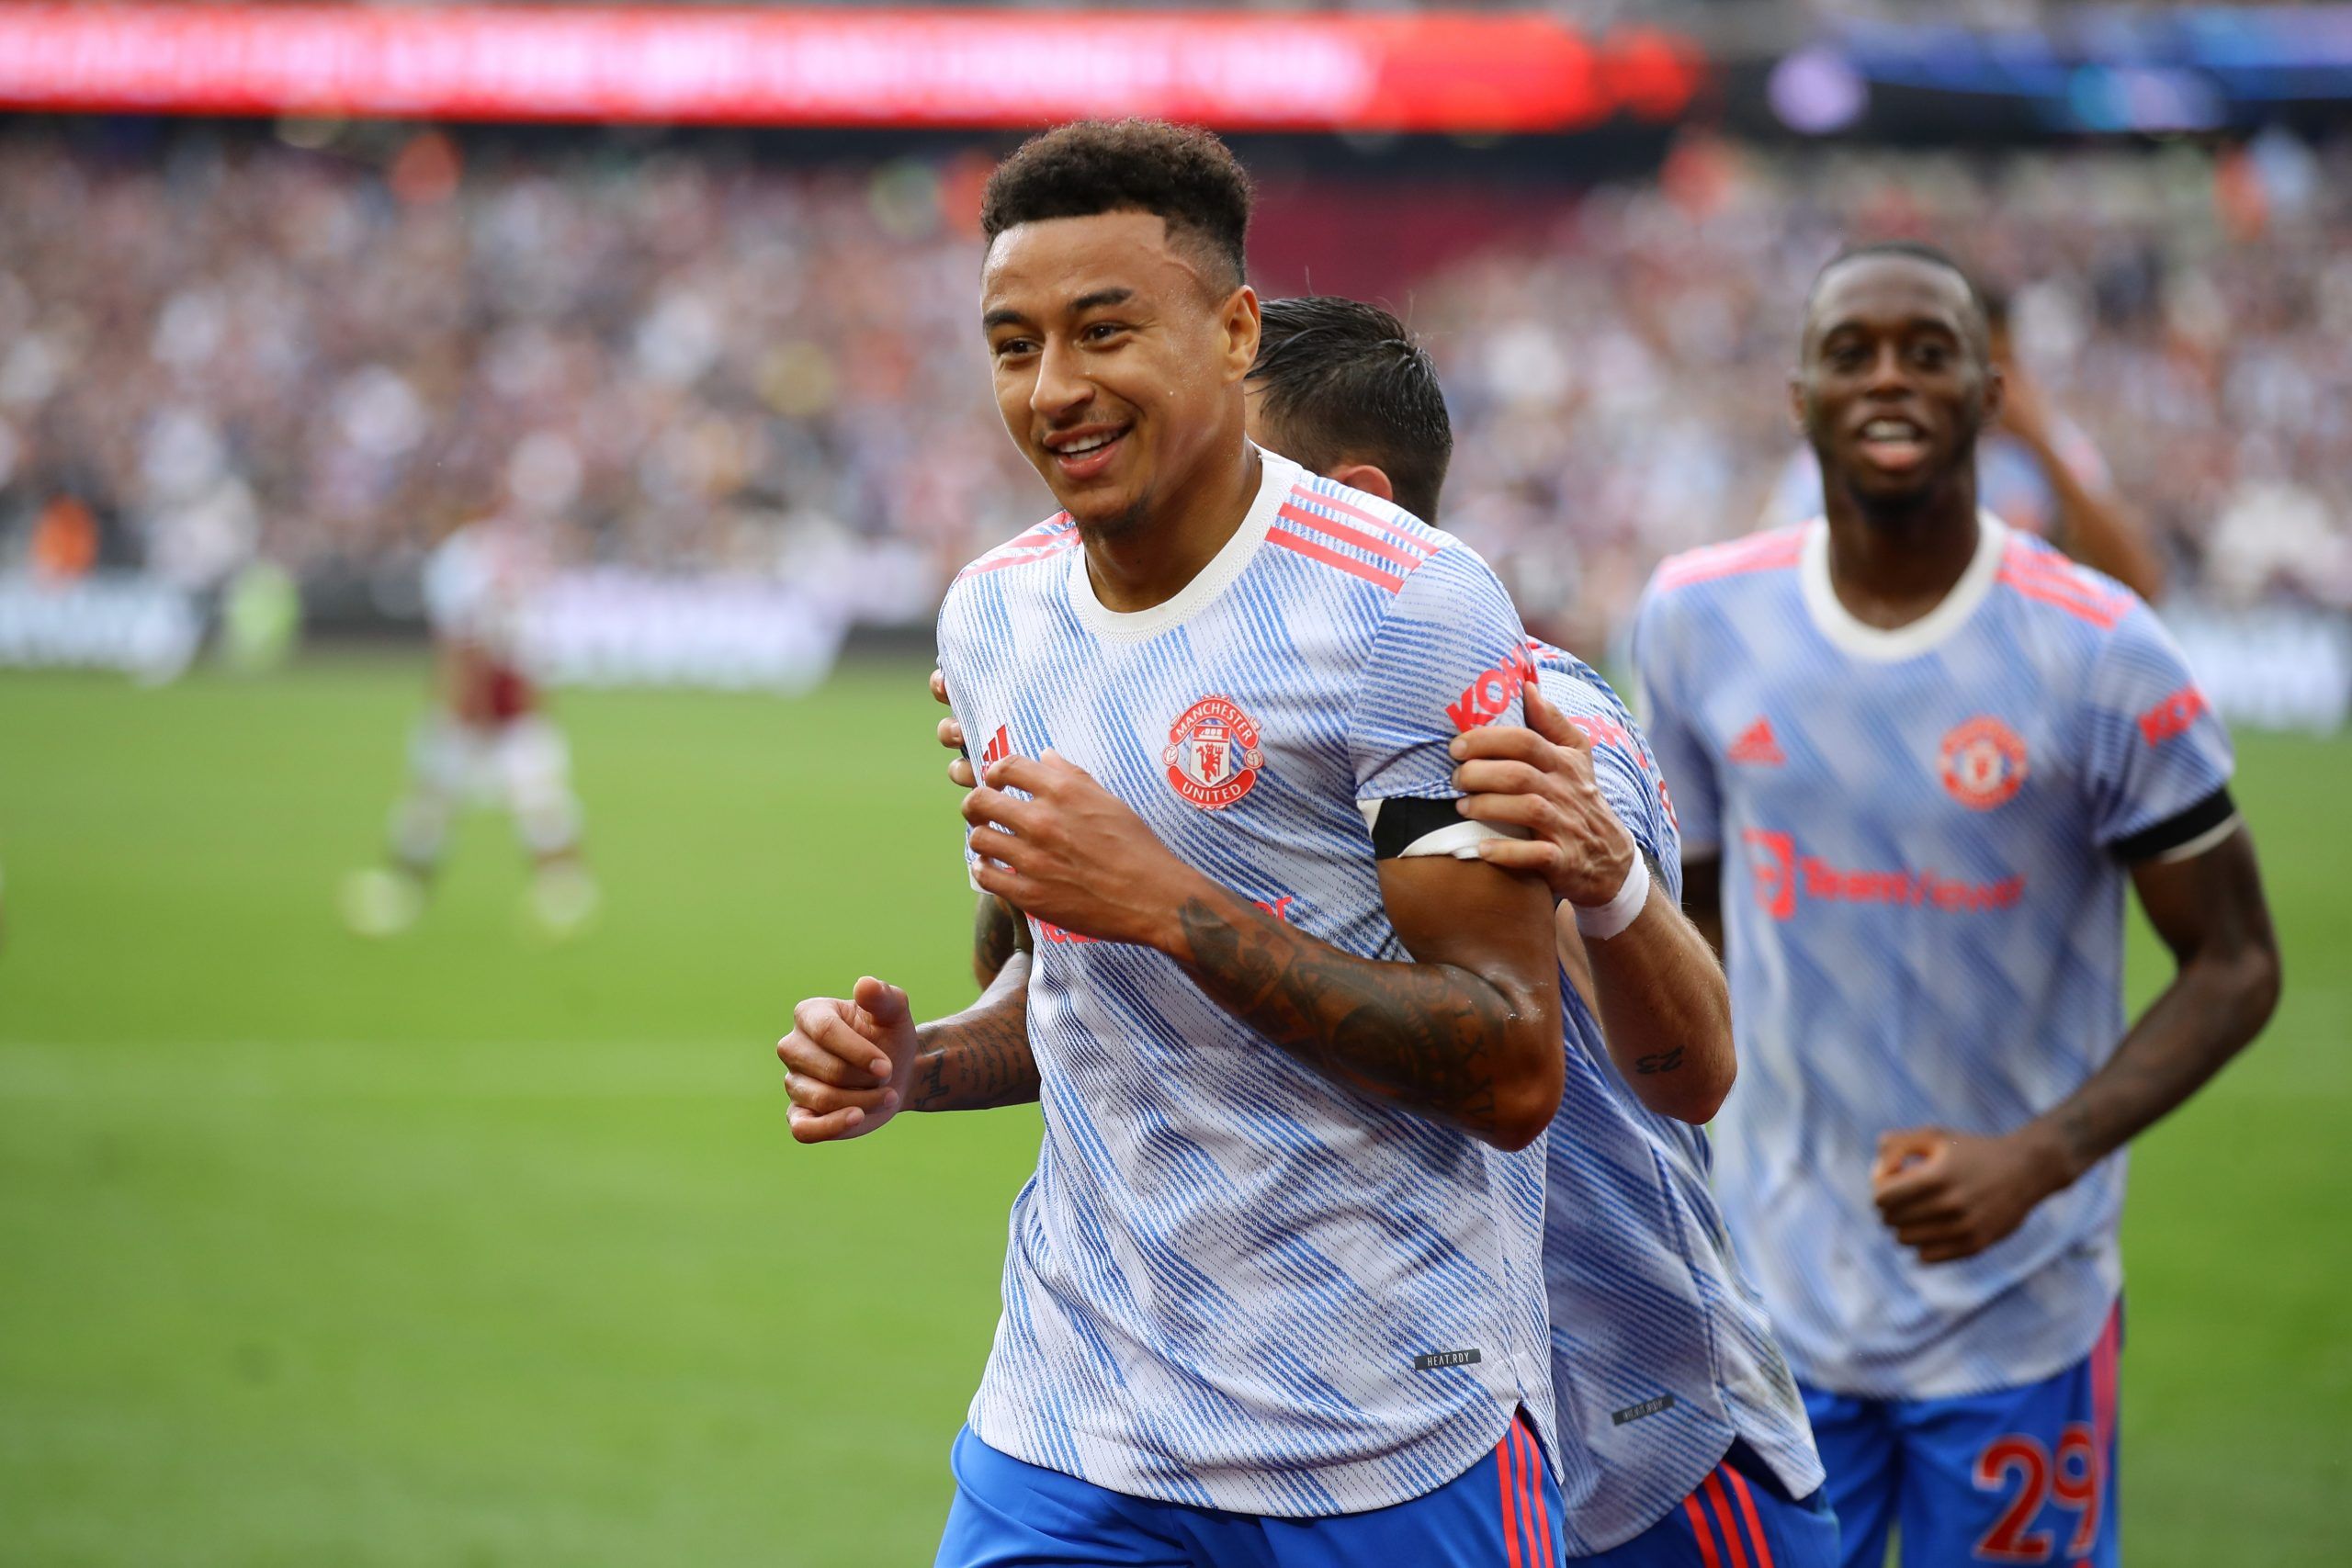 jesse-lingard-manchester-united-transfer-west-ham-united-transfer-news-david-moyes-update-premier-league-summer-transfer-window-ten-hagSoccer Football - Premier League - West Ham United v Manchester United - London Stadium, London, Britain - September 19, 2021 Manchester United's Jesse Lingard celebrates scoring their second goal REUTERS/David Klein EDITORIAL USE ONLY. No use with unauthorized audio, video, data, fixture lists, club/league logos or 'live' services. Online in-match use limited to